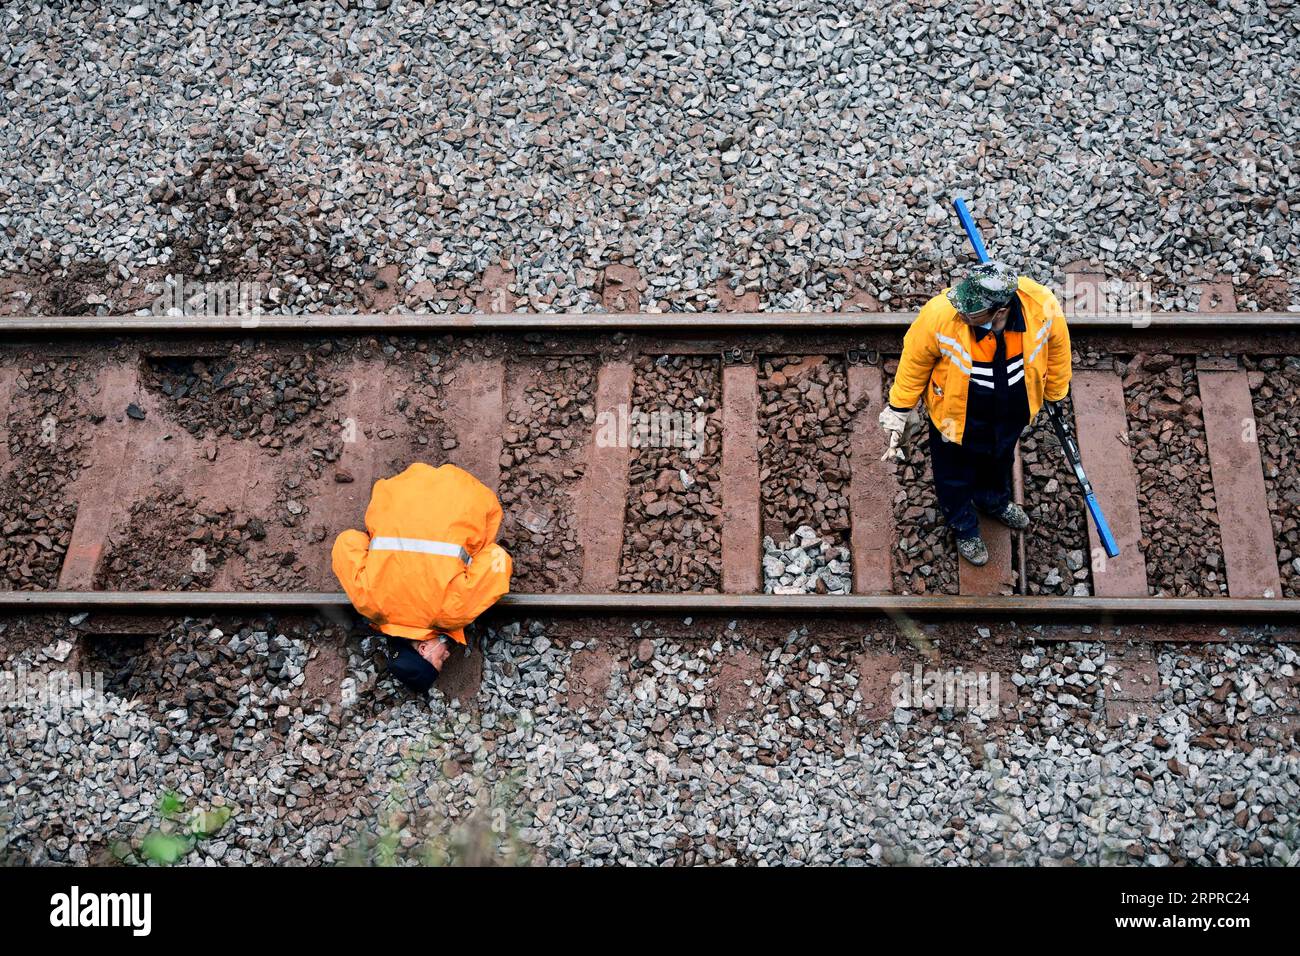 200331 -- YONGXING, March 31, 2020 -- Workers check the railway tracks at the site of a train derailment in Yongxing County of Chenzhou City, central China s Hunan Province, March 31, 2020. Railway repair is well underway after a train derailed in Chenzhou Monday that killed one and injured 127.  CHINA-HUNAN-CHENZHOU-TRAIN DERAILMENT-REPAIR CN LixGa PUBLICATIONxNOTxINxCHN Stock Photo